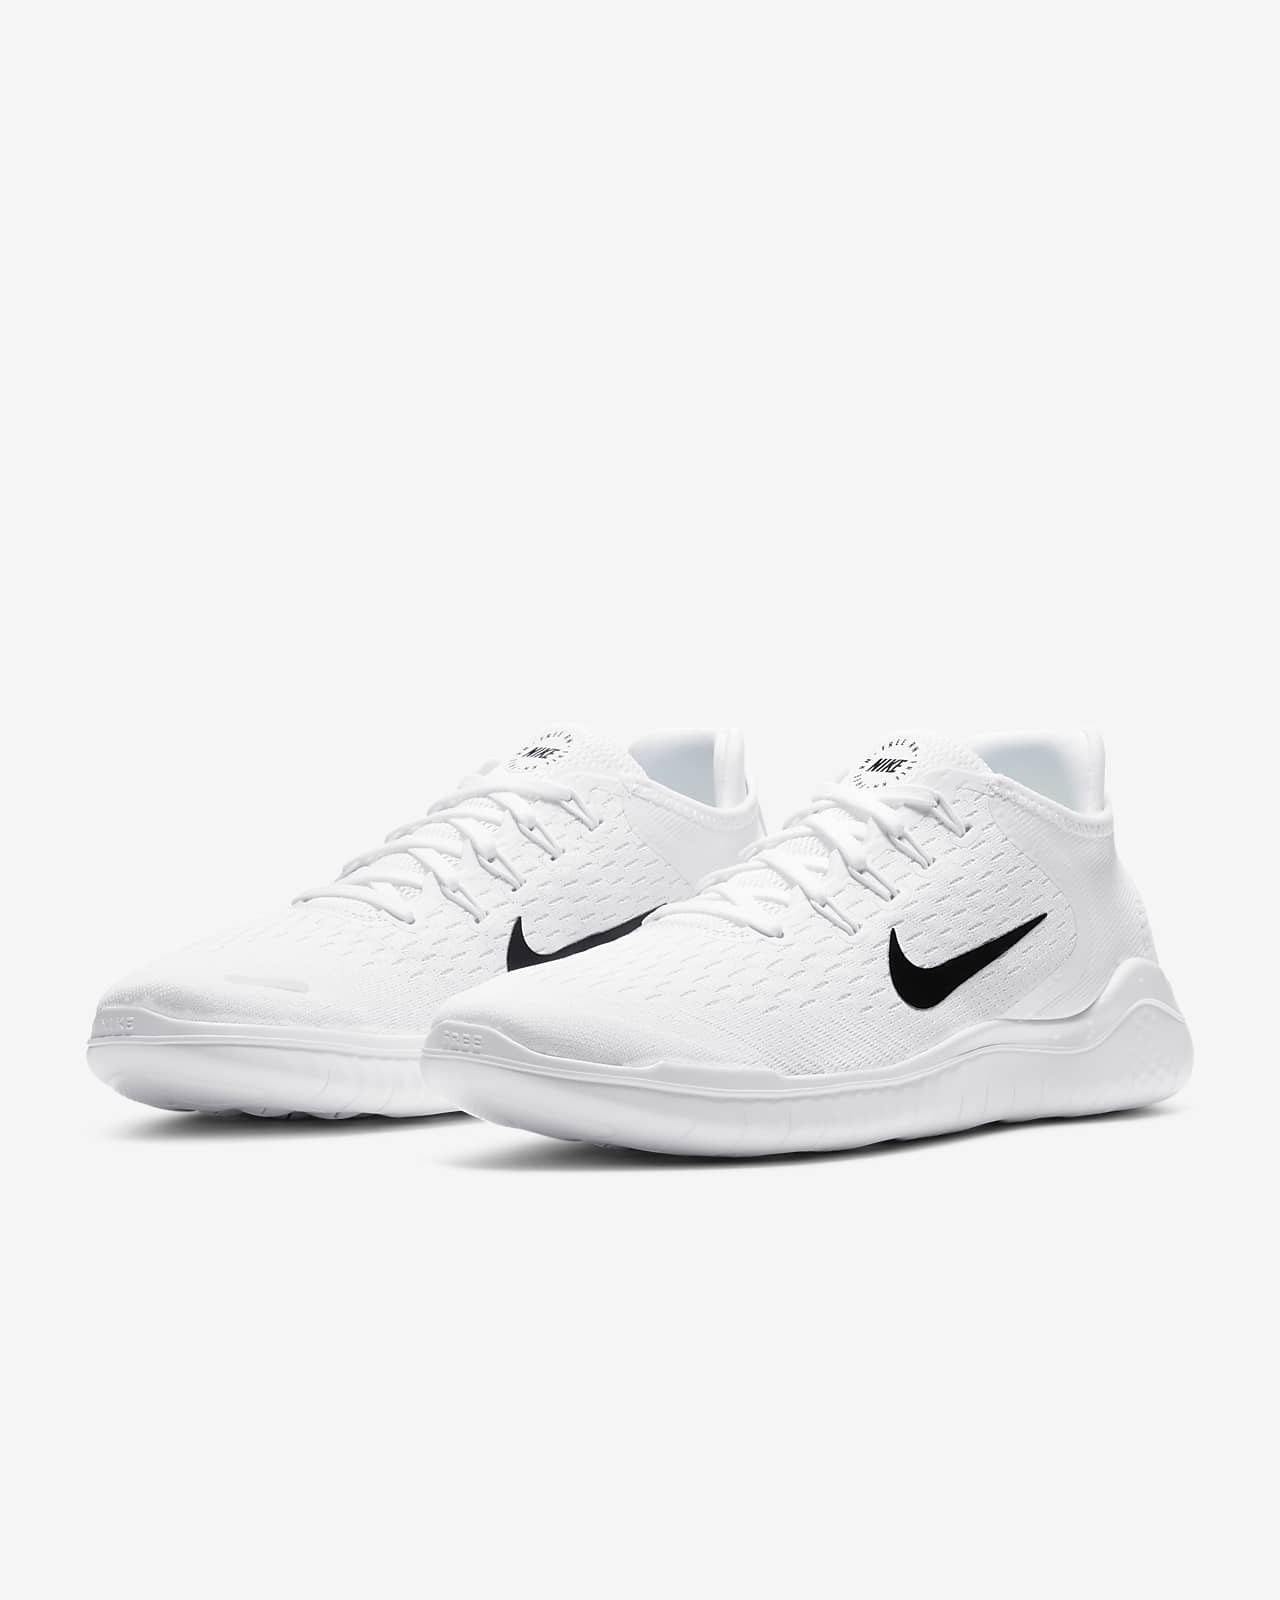 The Best Nike Marathon Shoes for Men and Women. Nike LU